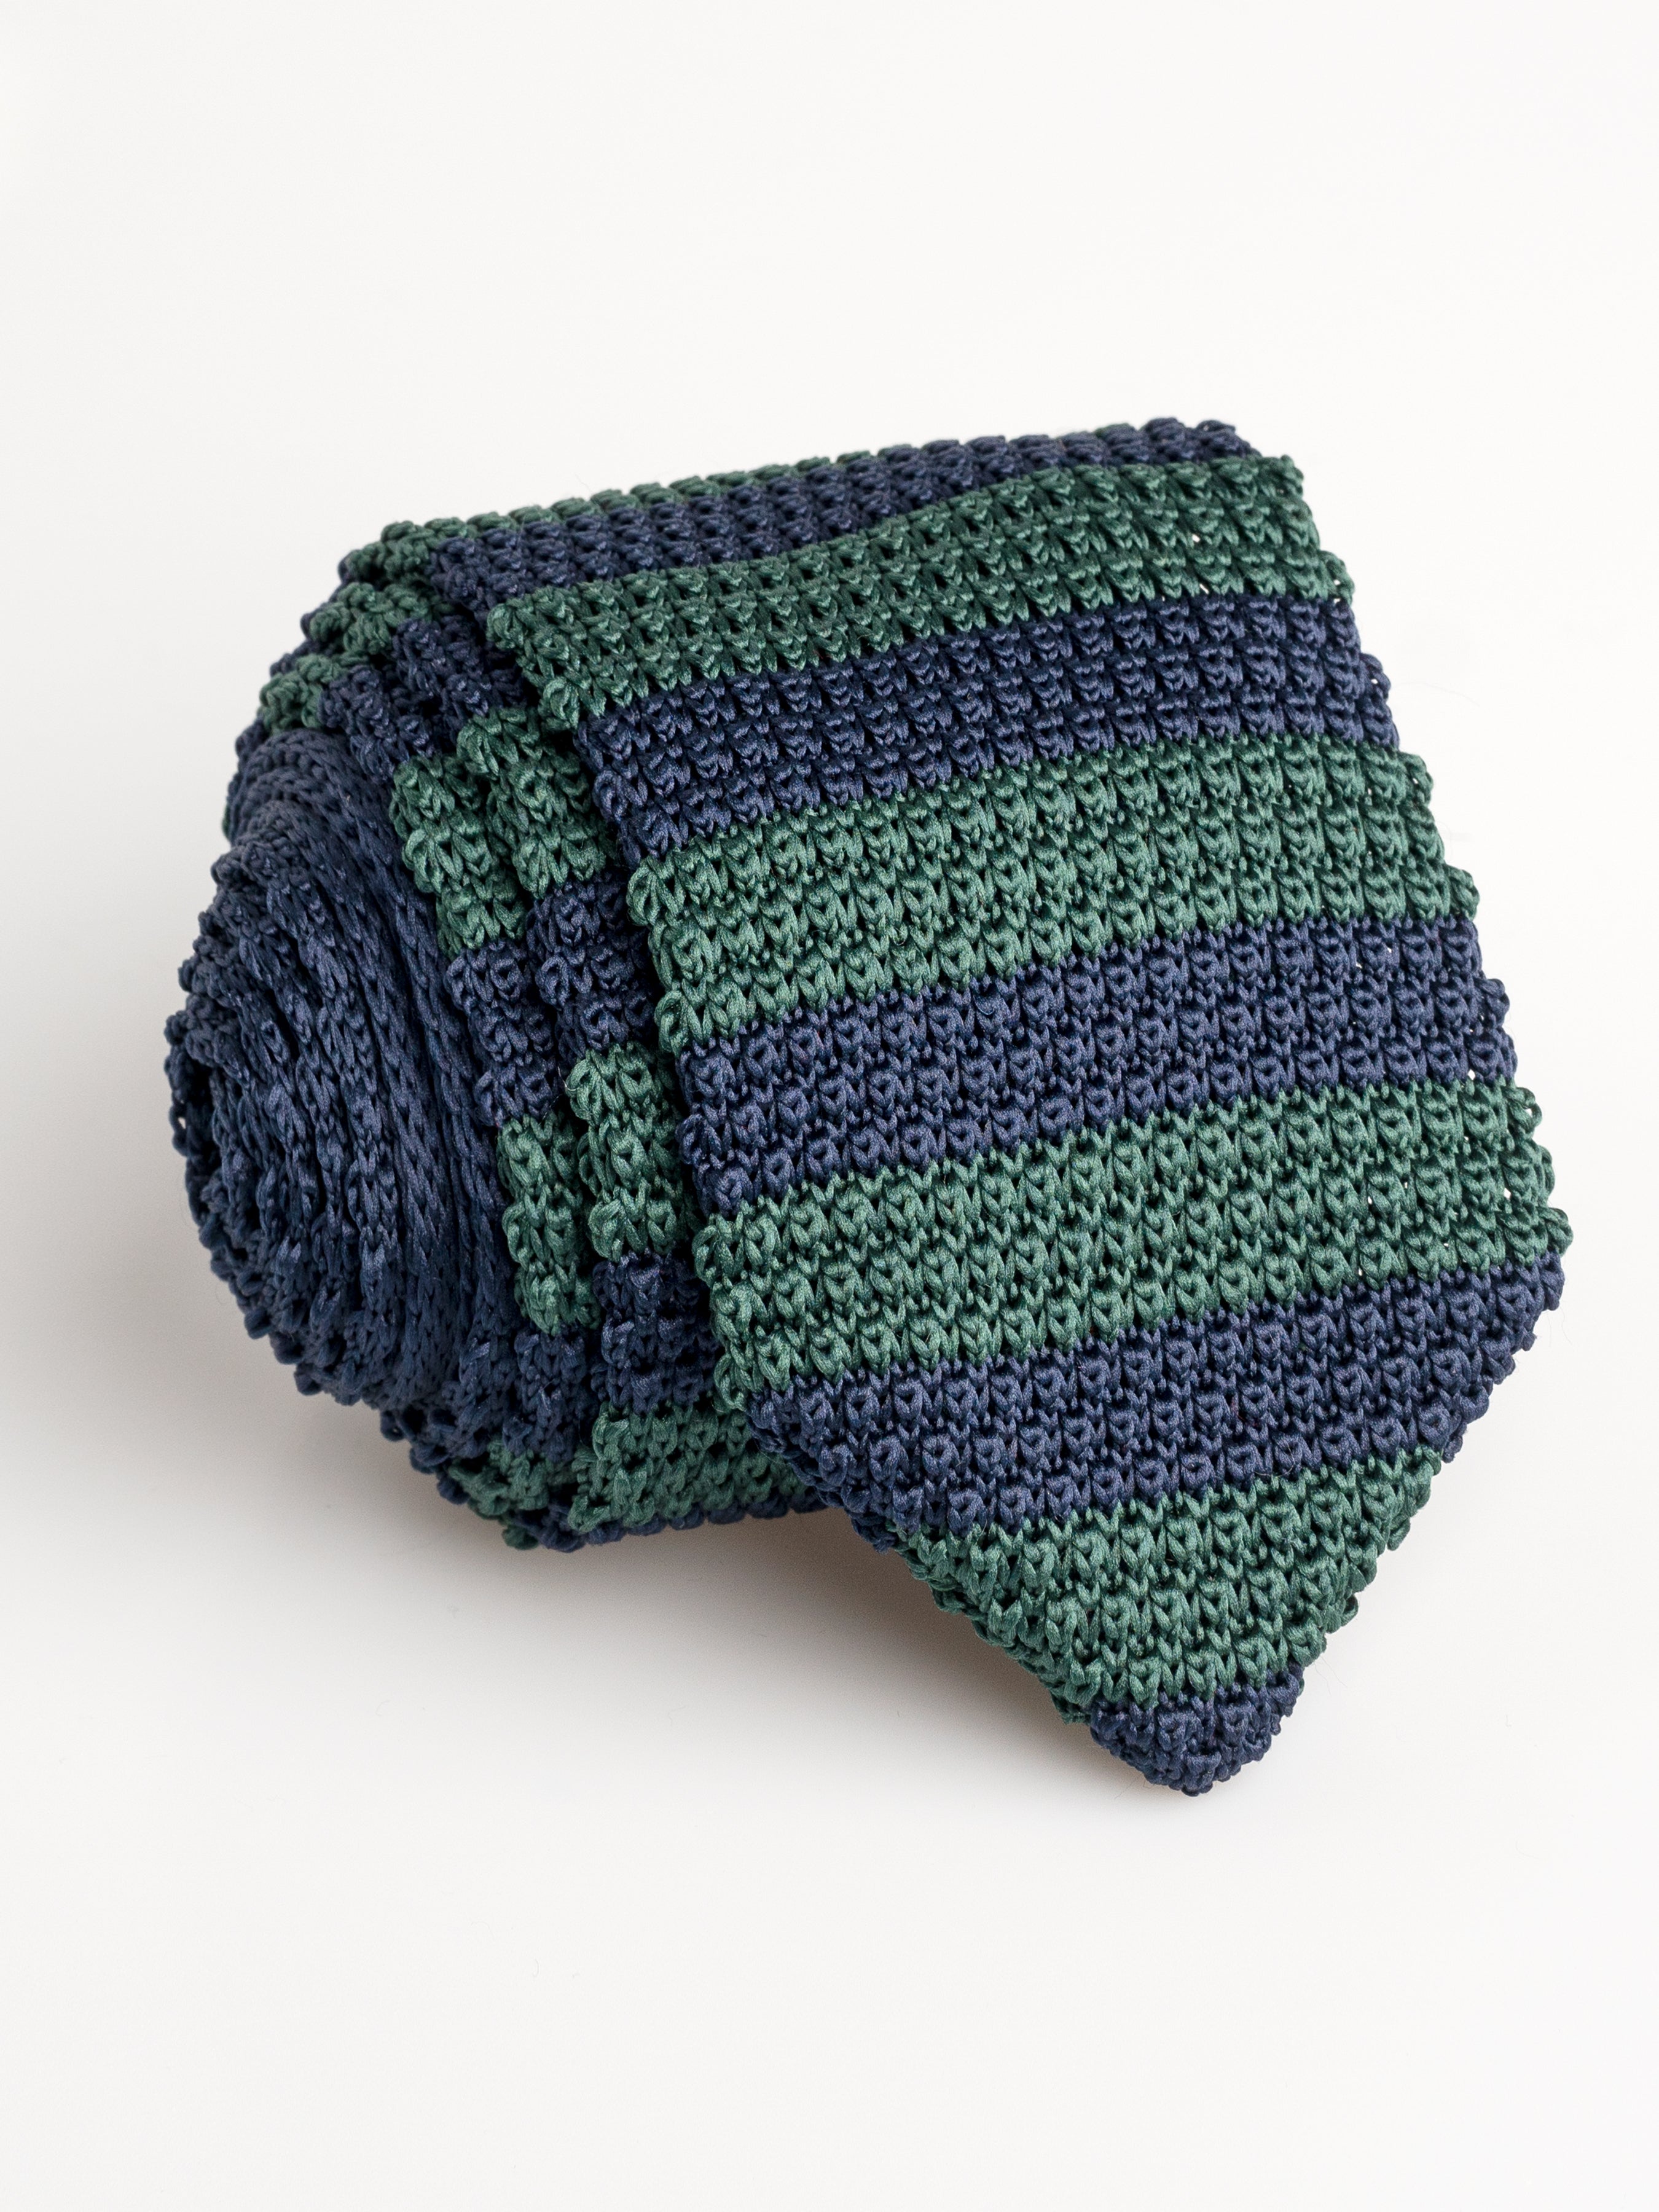 Knit Tie - Navy Blue With Green Stripes